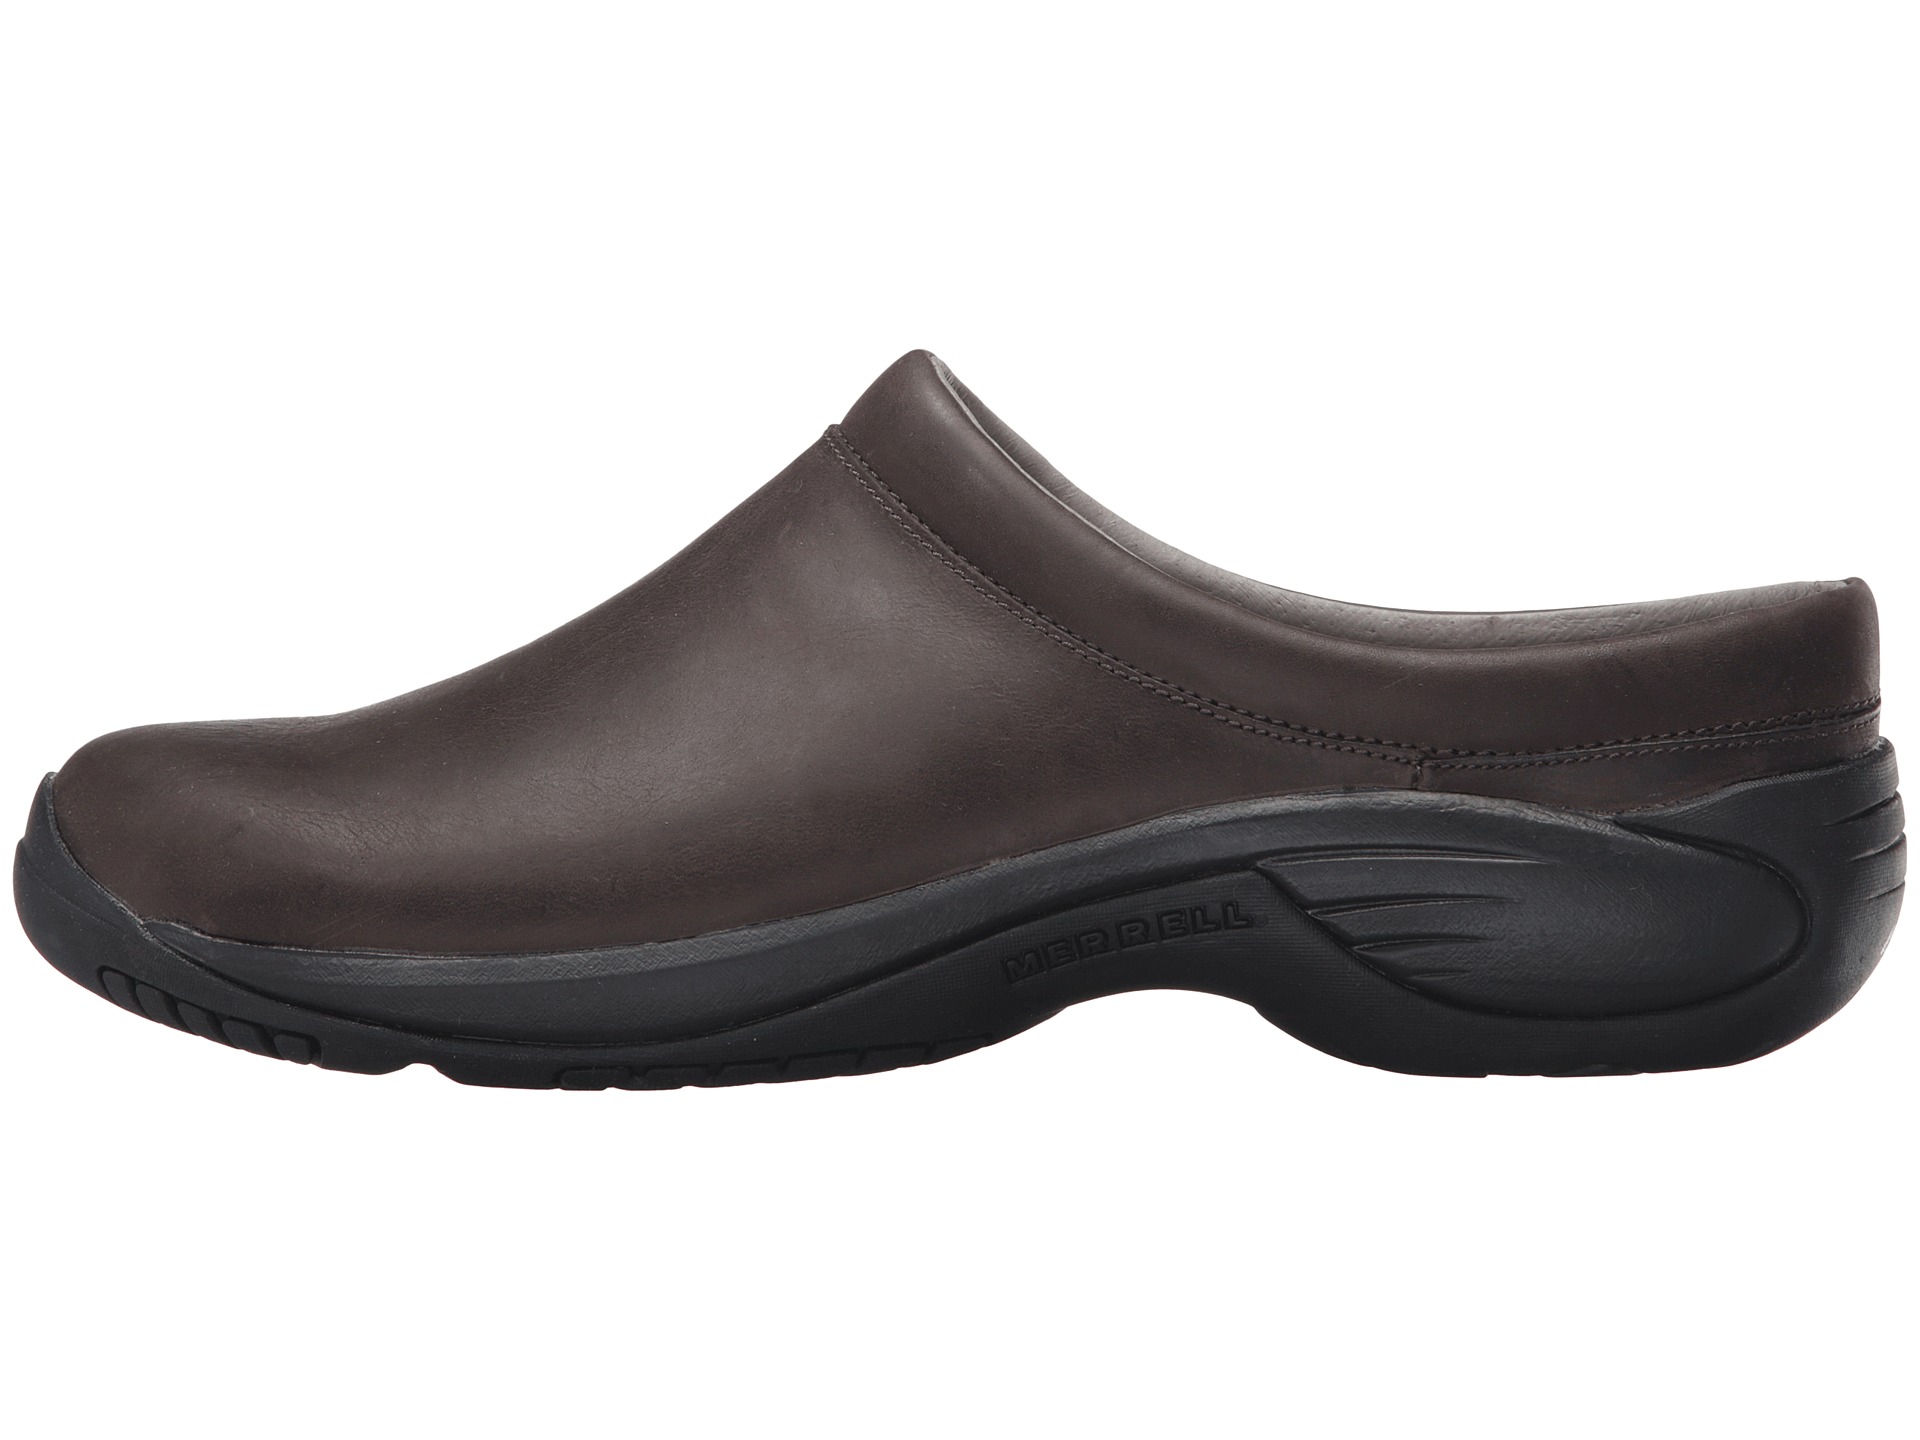 Merrell Encore Chill Smooth at Zappos.com